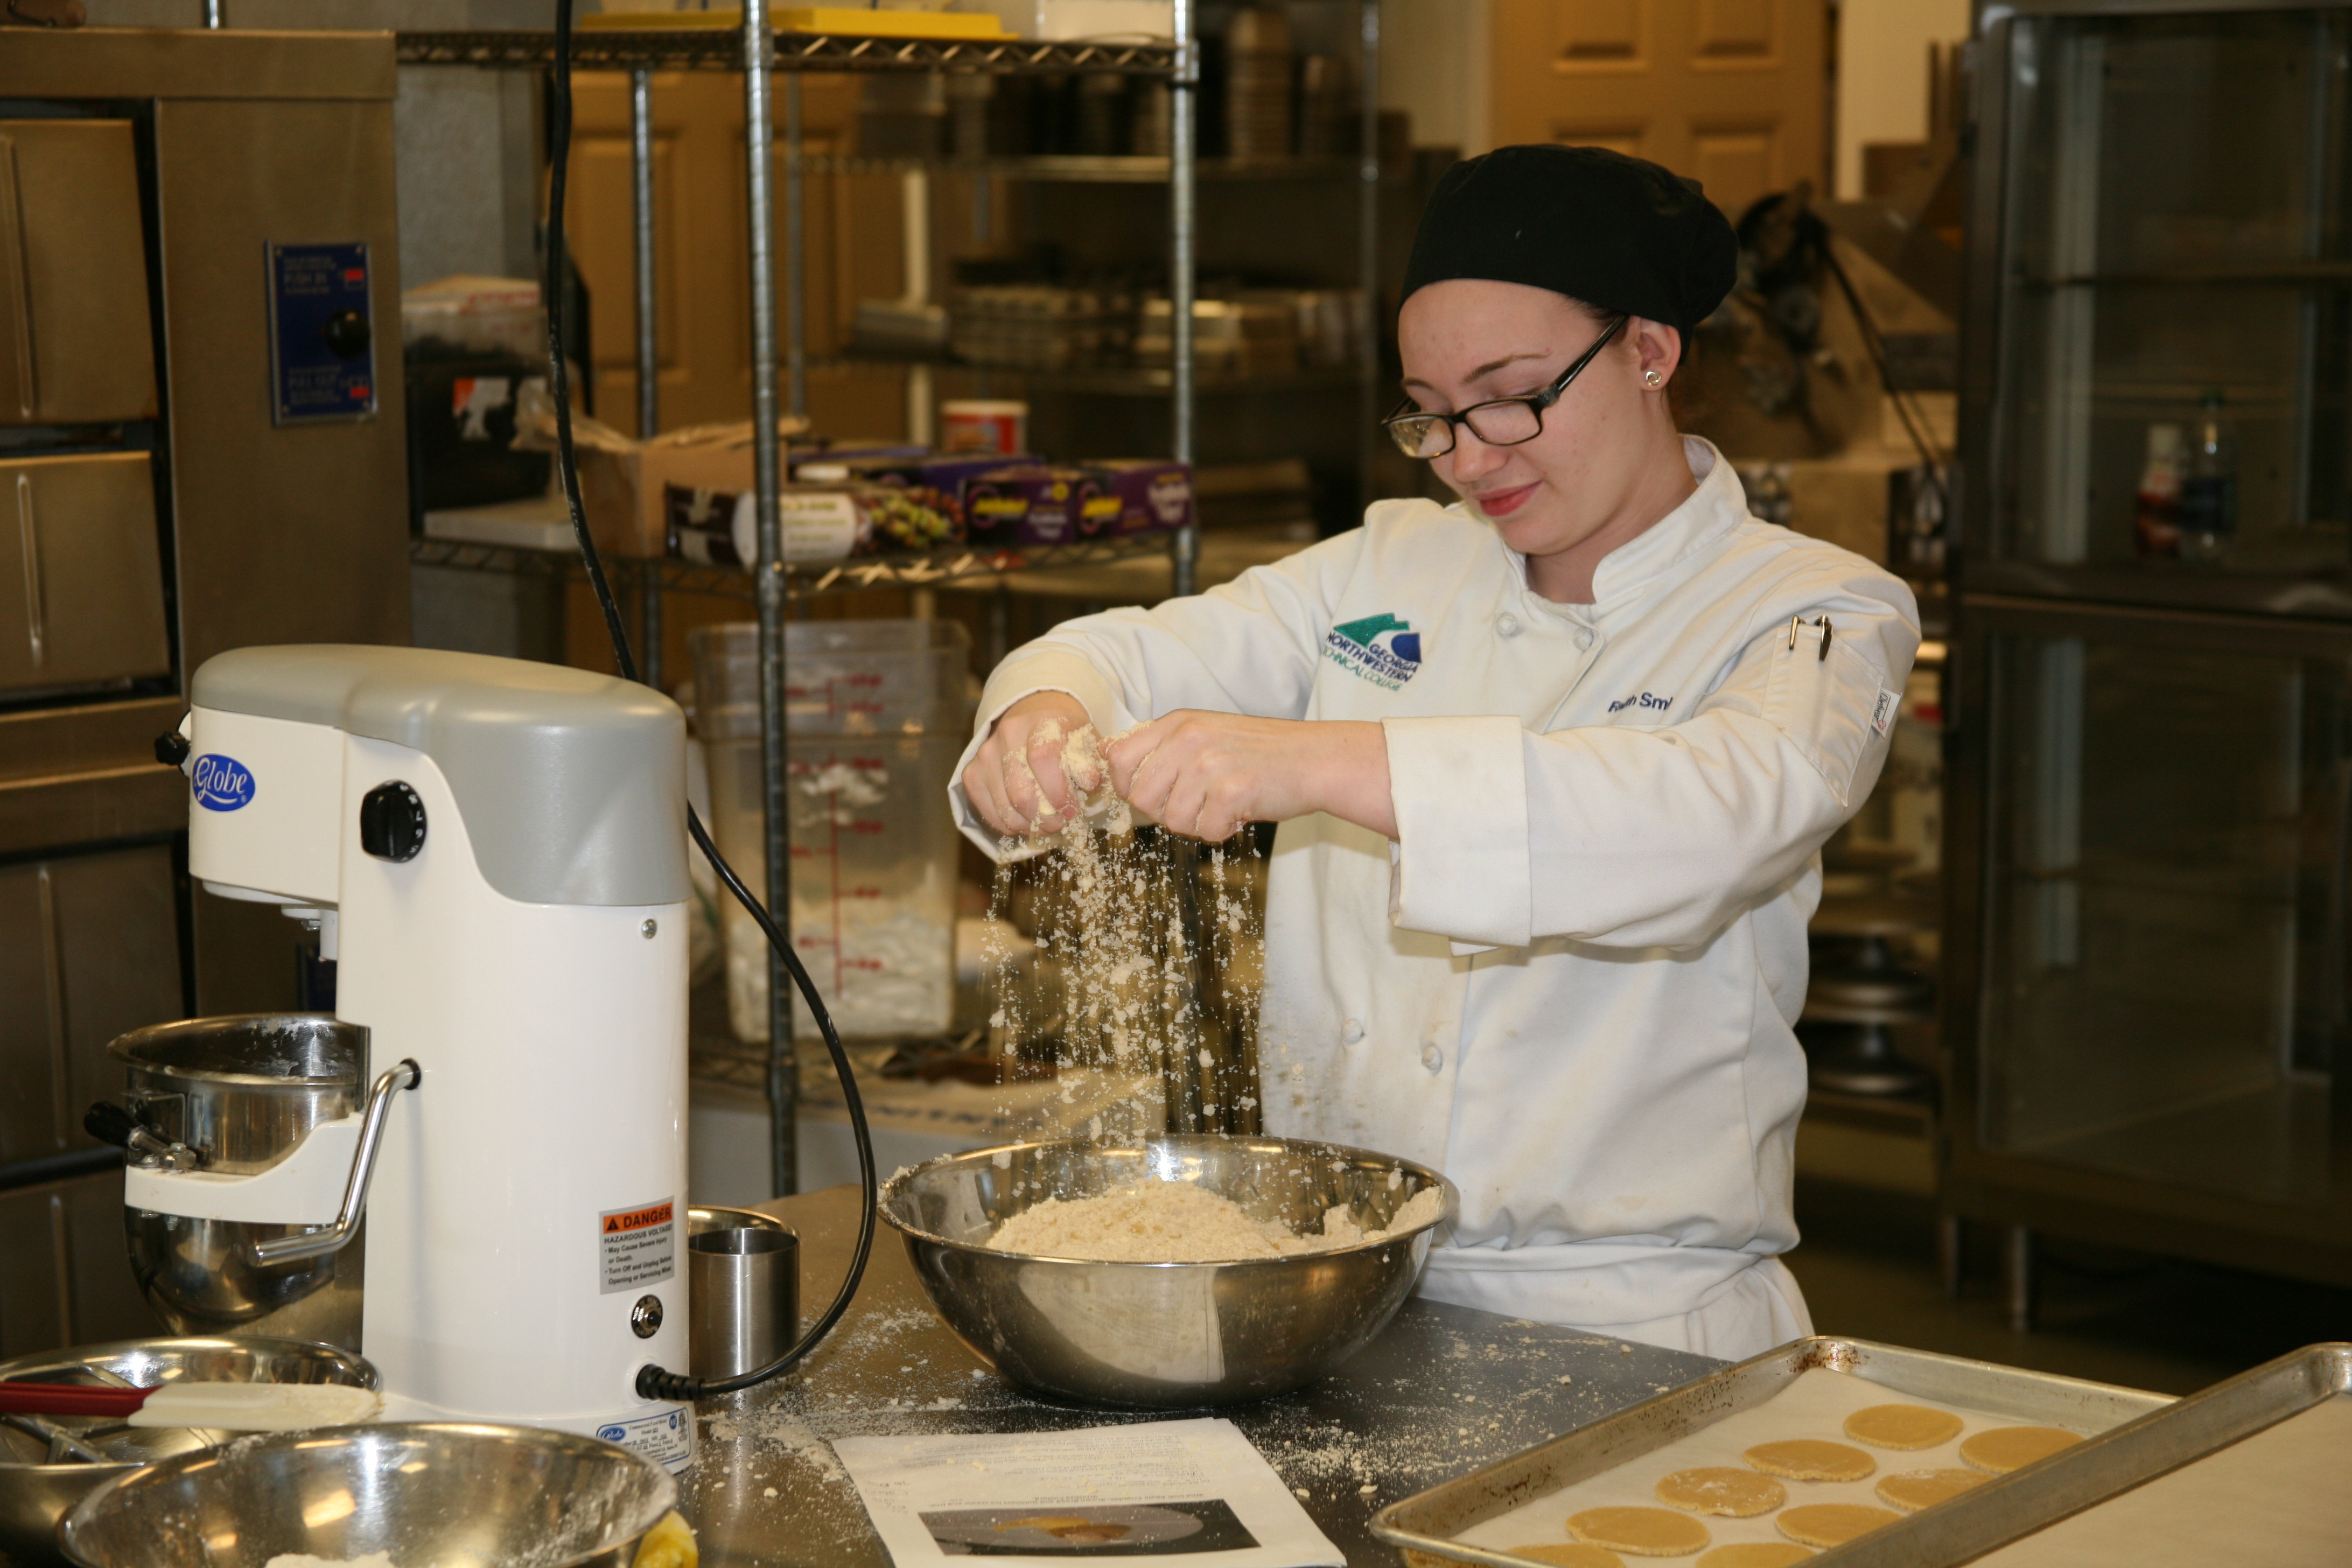 Faith Smith of Calhoun prepares traditional Irish Cuisine for a special “Taste of Ireland” reception and dinner held at GNTC in March.  